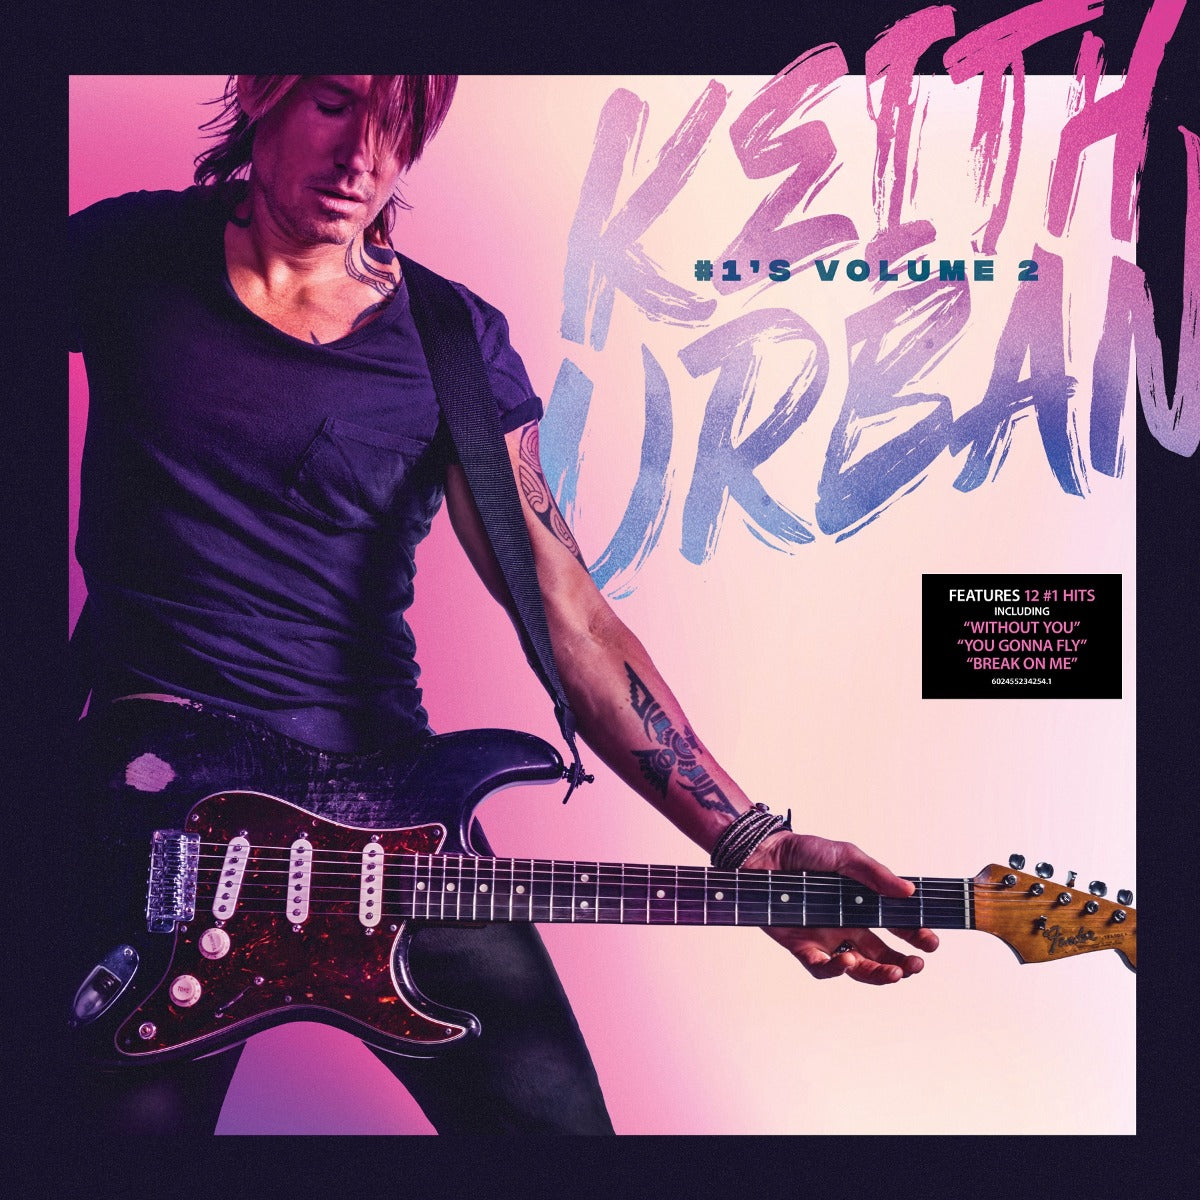 Keith Urban | Keith Urban - #1's Volume 2 (Limited Edition, Grape Colored Vinyl, Poster) | Vinyl